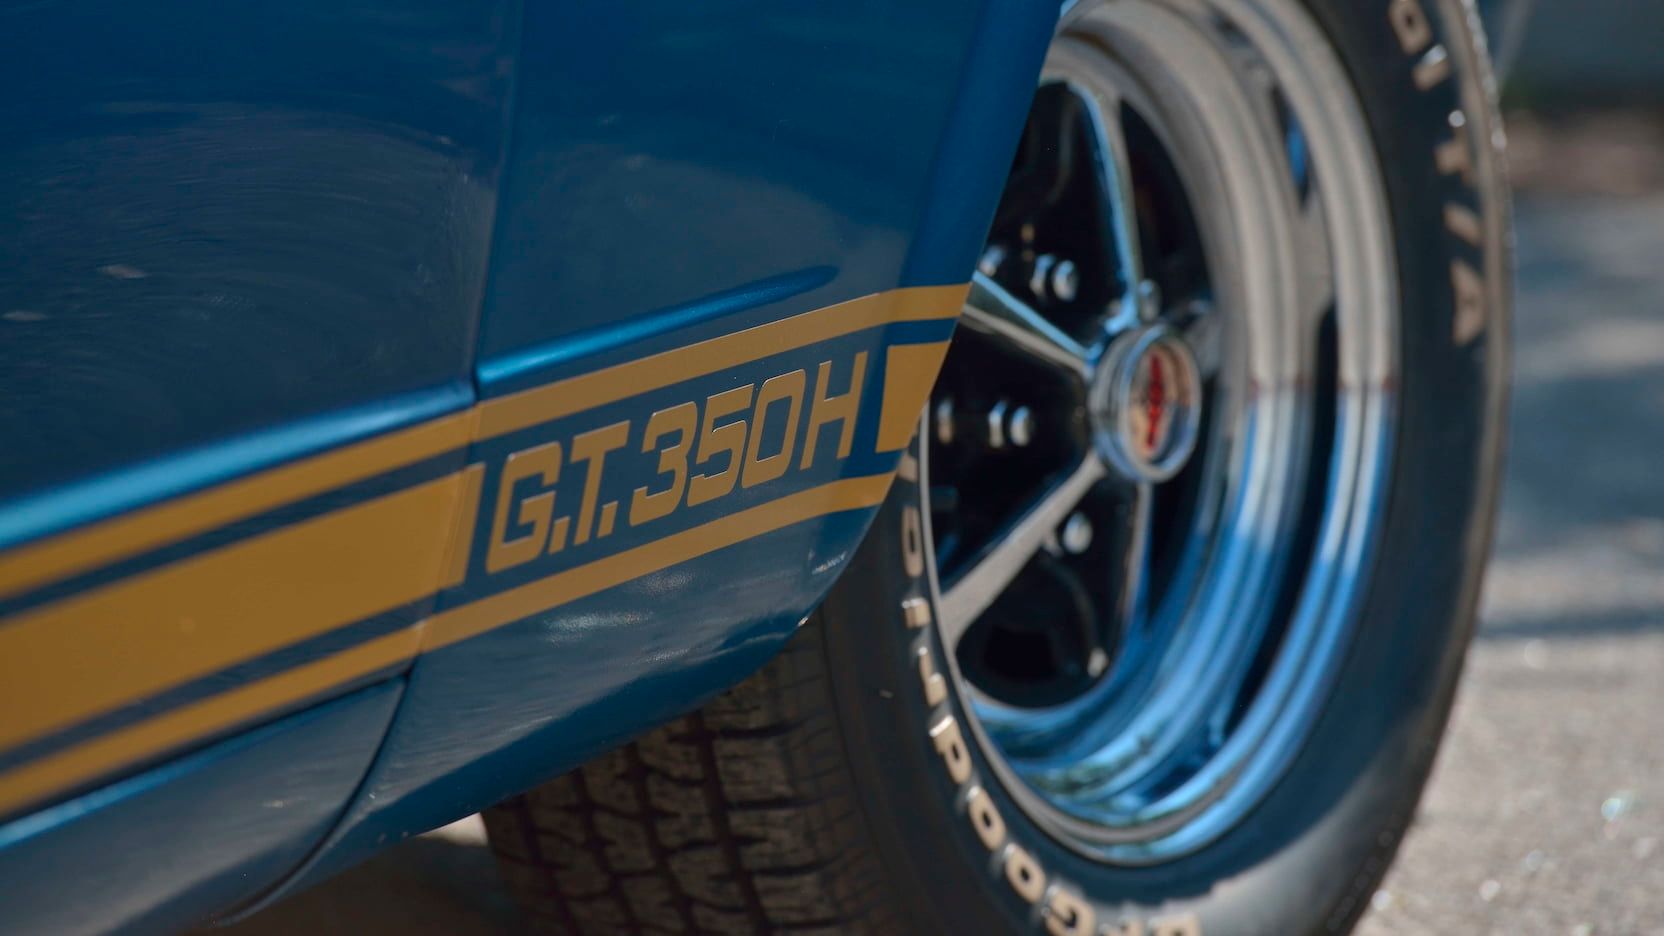 Side Stripes and GT350H branding